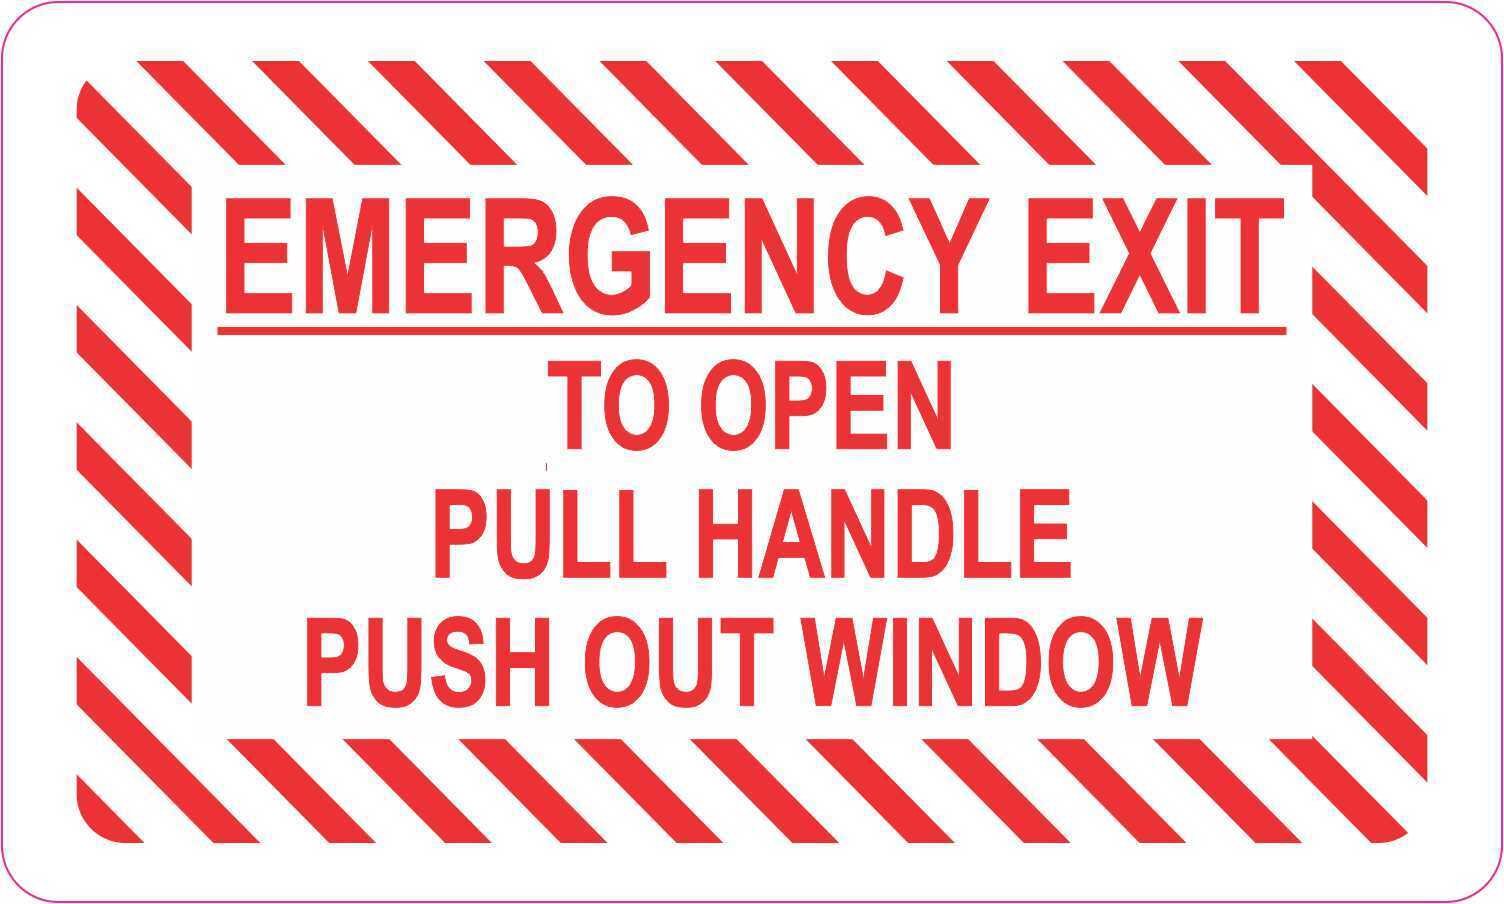 5in x 3in Emergency Exit Window Vinyl Sticker Vehicle Sign Business Decal